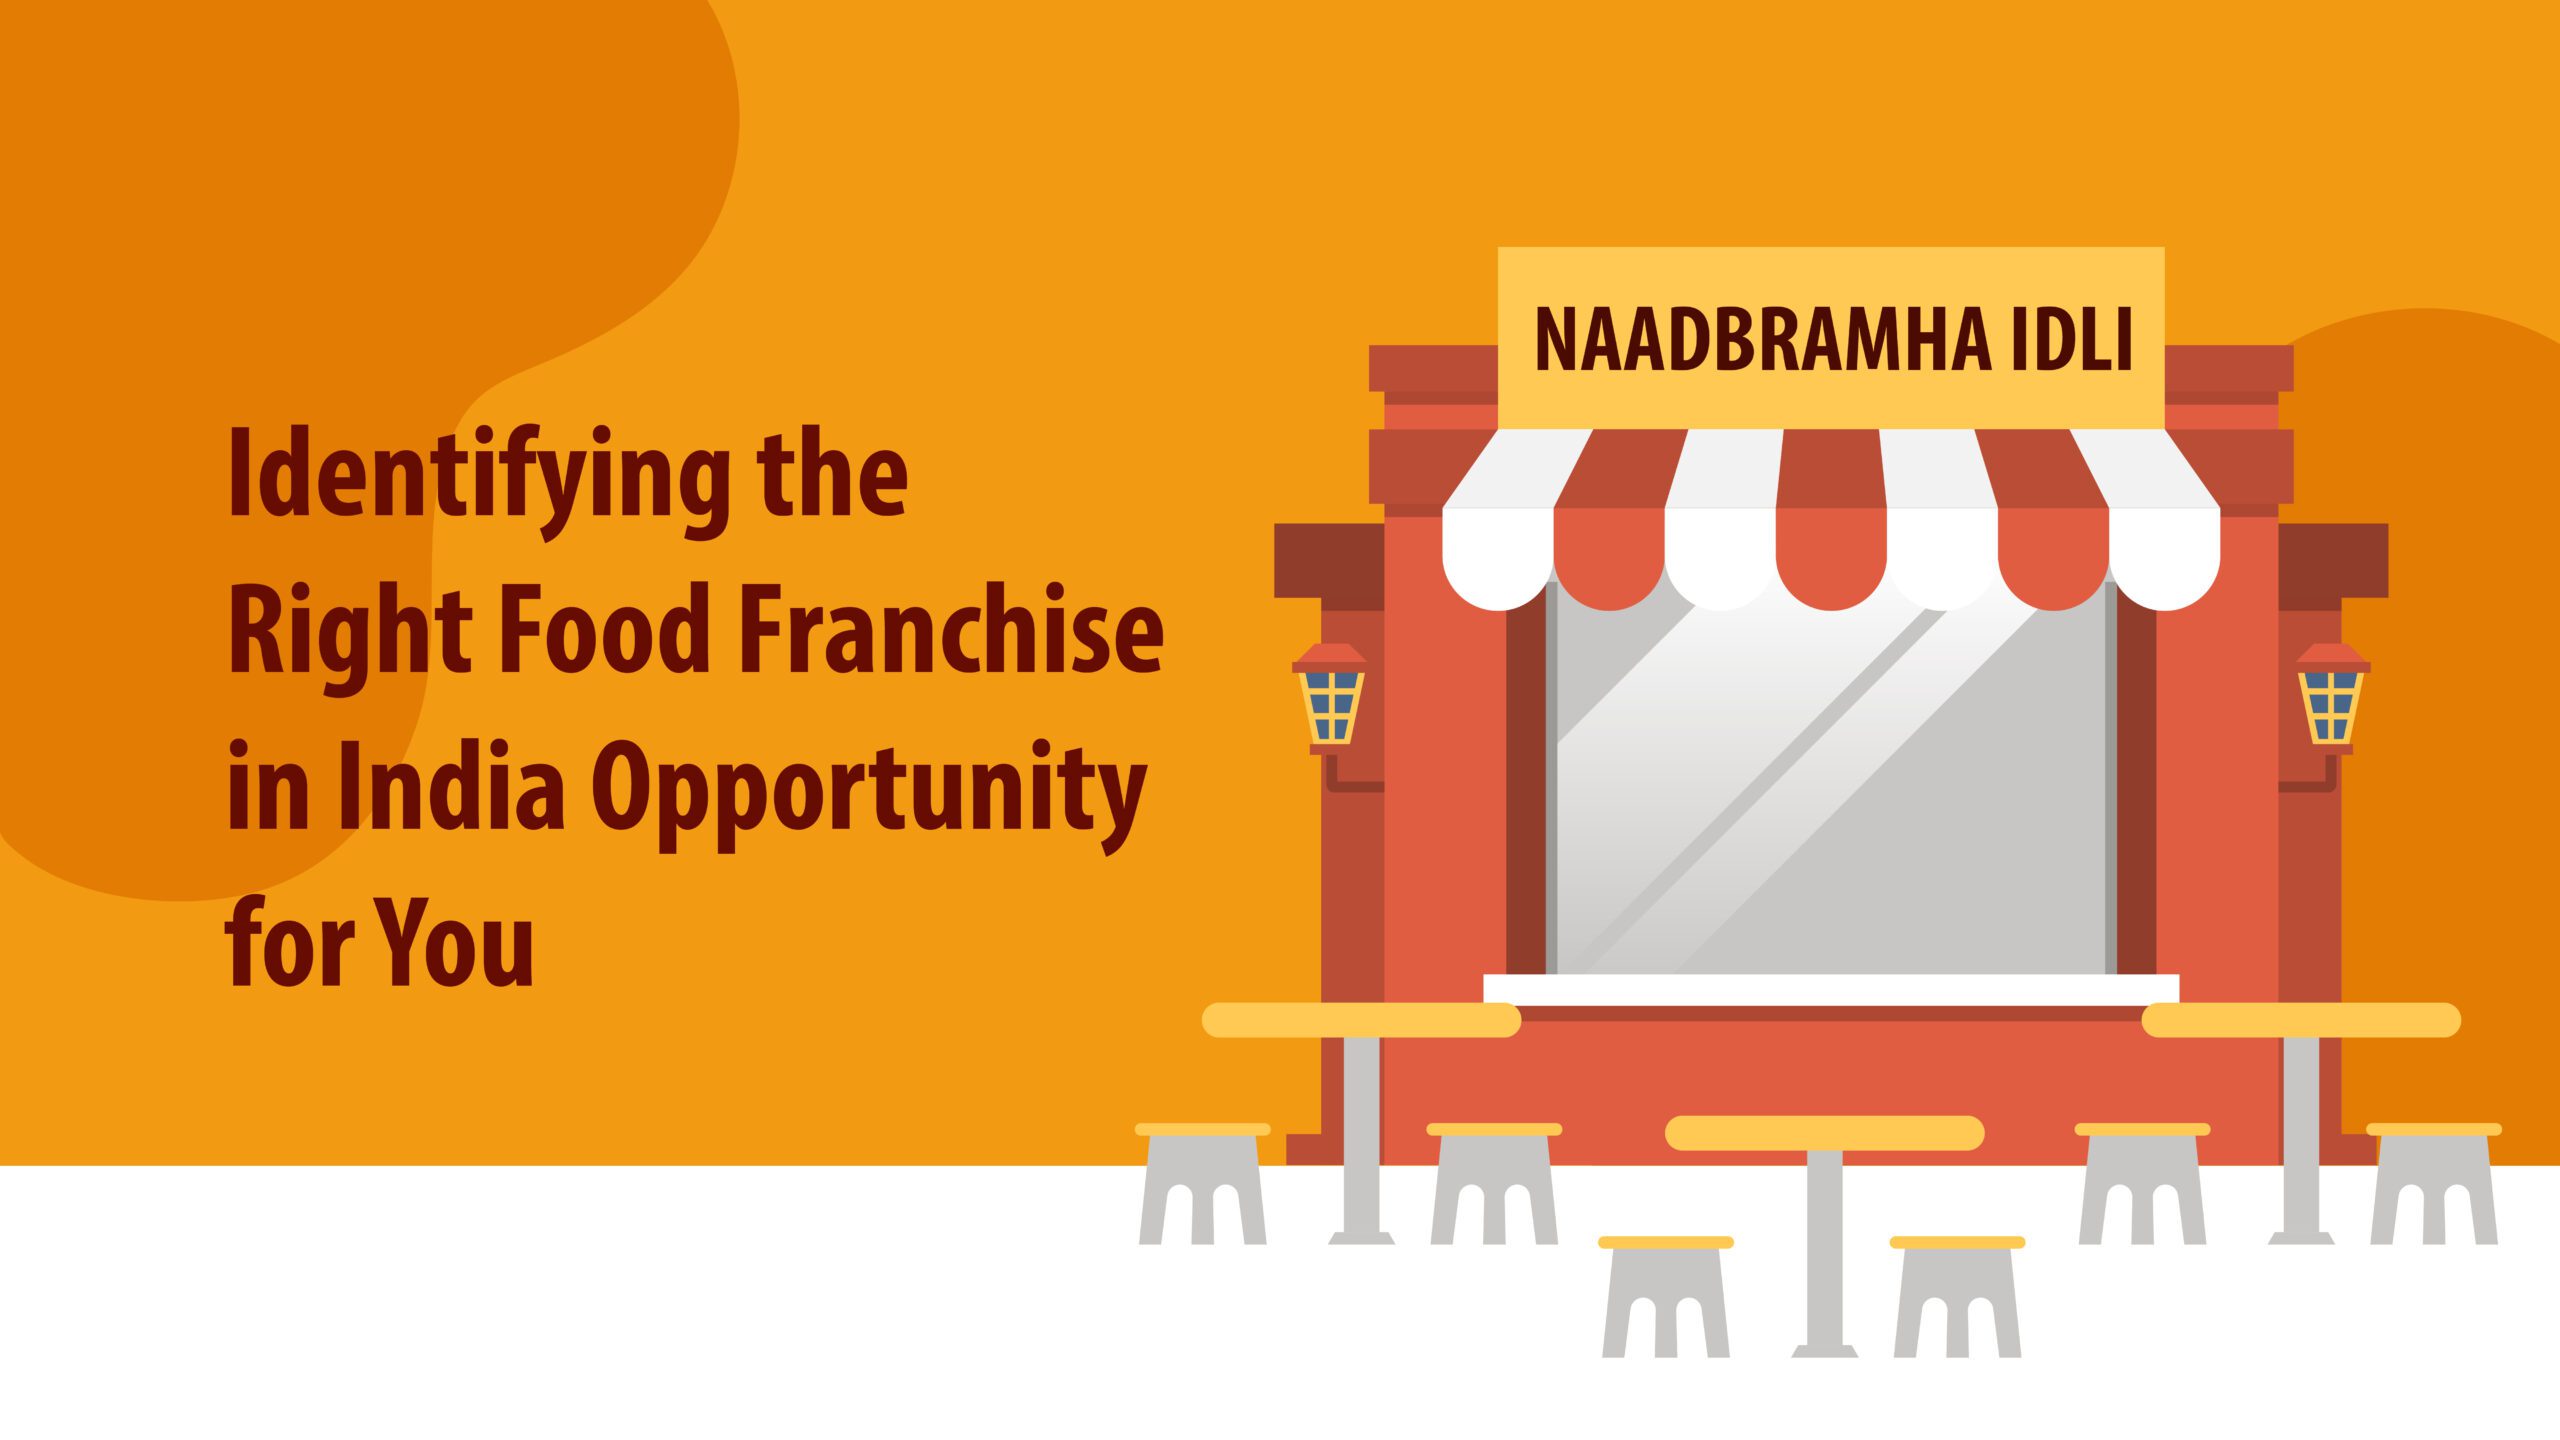 Identifying the Right Food Franchise in India Opportunity for You